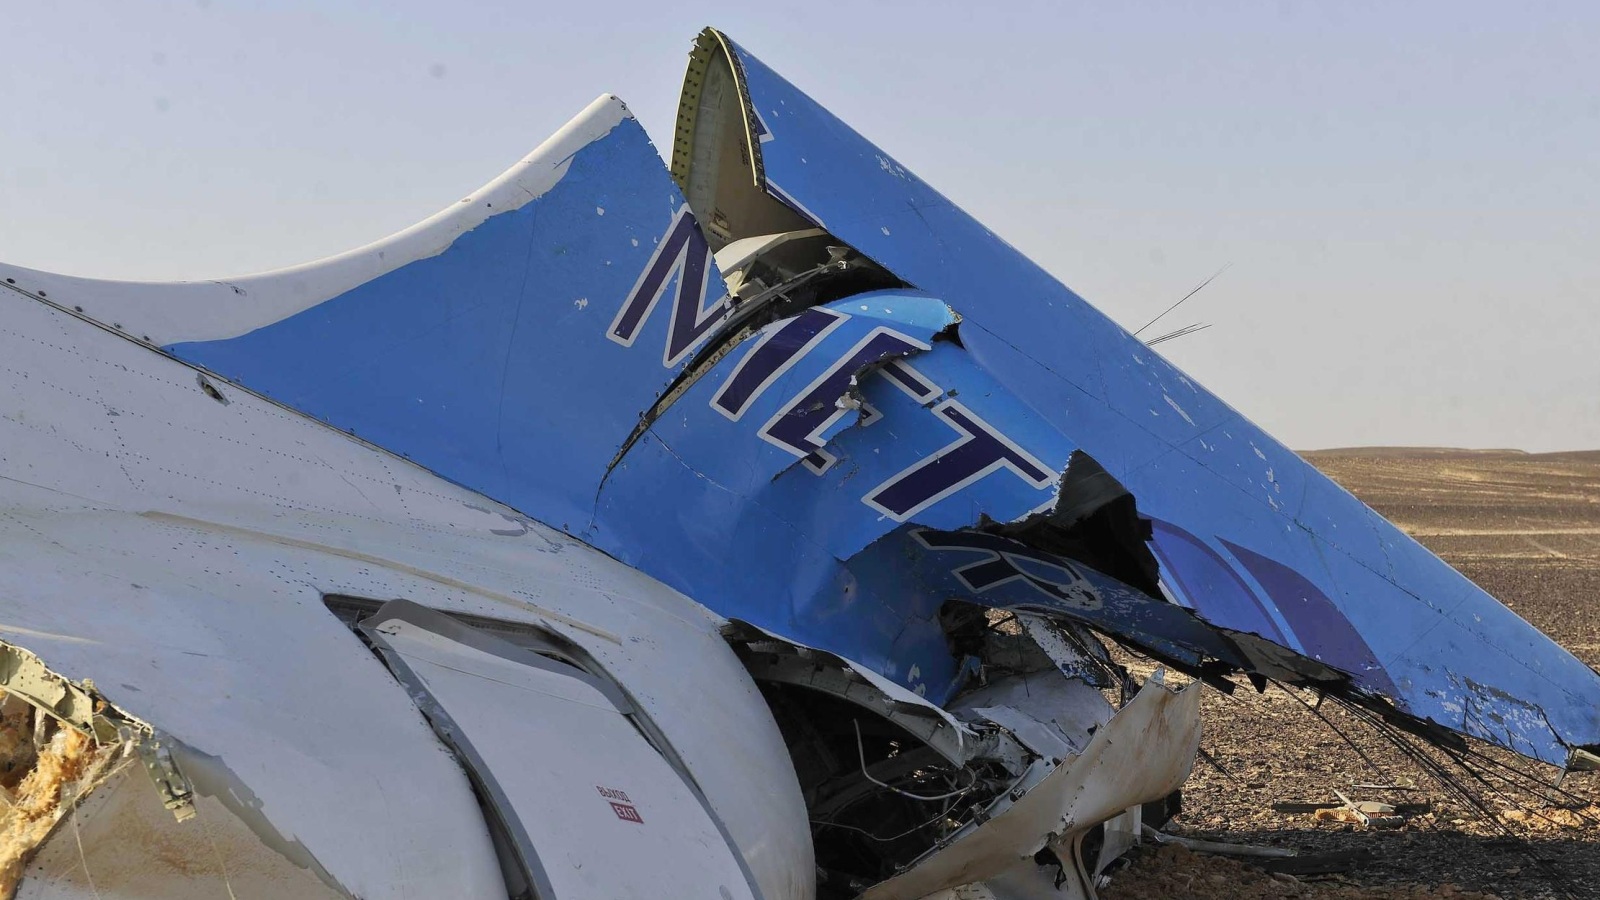 This image released by the Prime Minister's office shows the tail of a Metrojet plane that crashed in Hassana Egypt, Friday, Oct. 31, 2015. The Russian aircraft carrying 224 people, including 17 children, crashed Saturday in a remote mountainous region in the Sinai Peninsula about 20 minutes after taking off from a Red Sea resort popular with Russian tourists, the Egyptian government said. There were no survivors.(Suliman el-Oteify, Egypt Prime Minister's Office via AP)